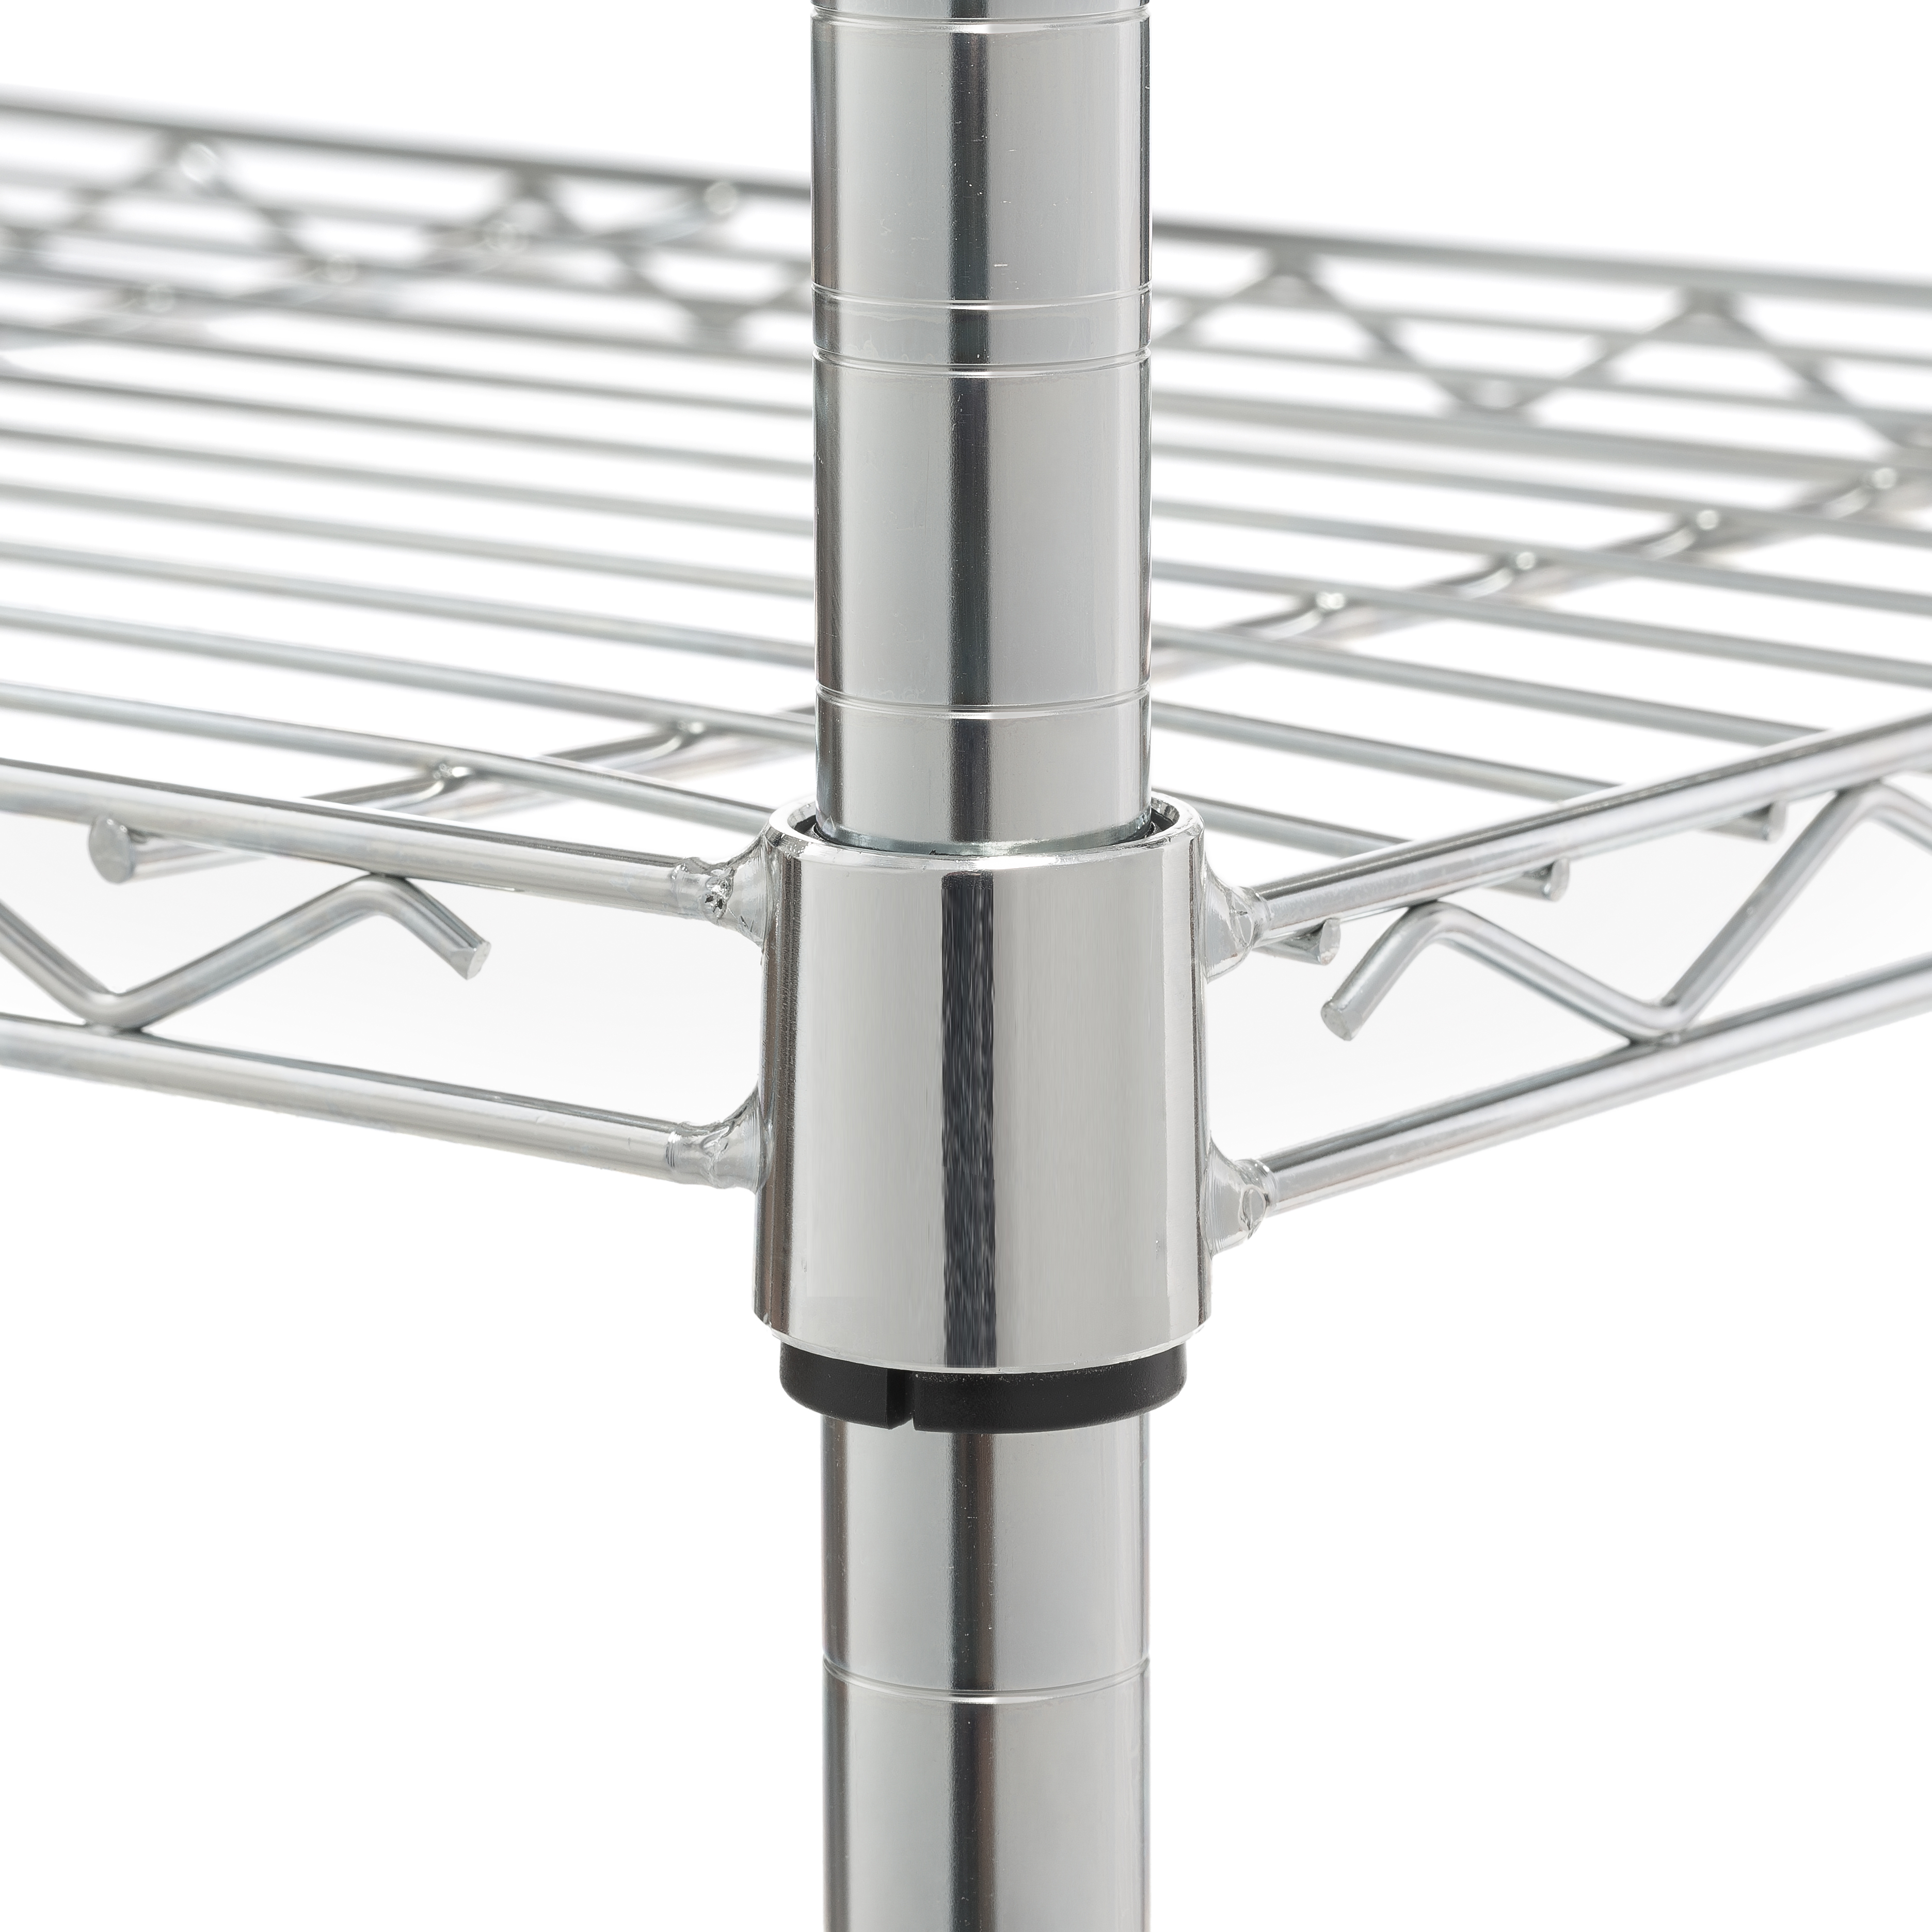 Hyper Tough 4 Shelf Steel Wire Shelving Tower with Caster 16"Dx16"Wx57.4"H, Chrome - image 4 of 6